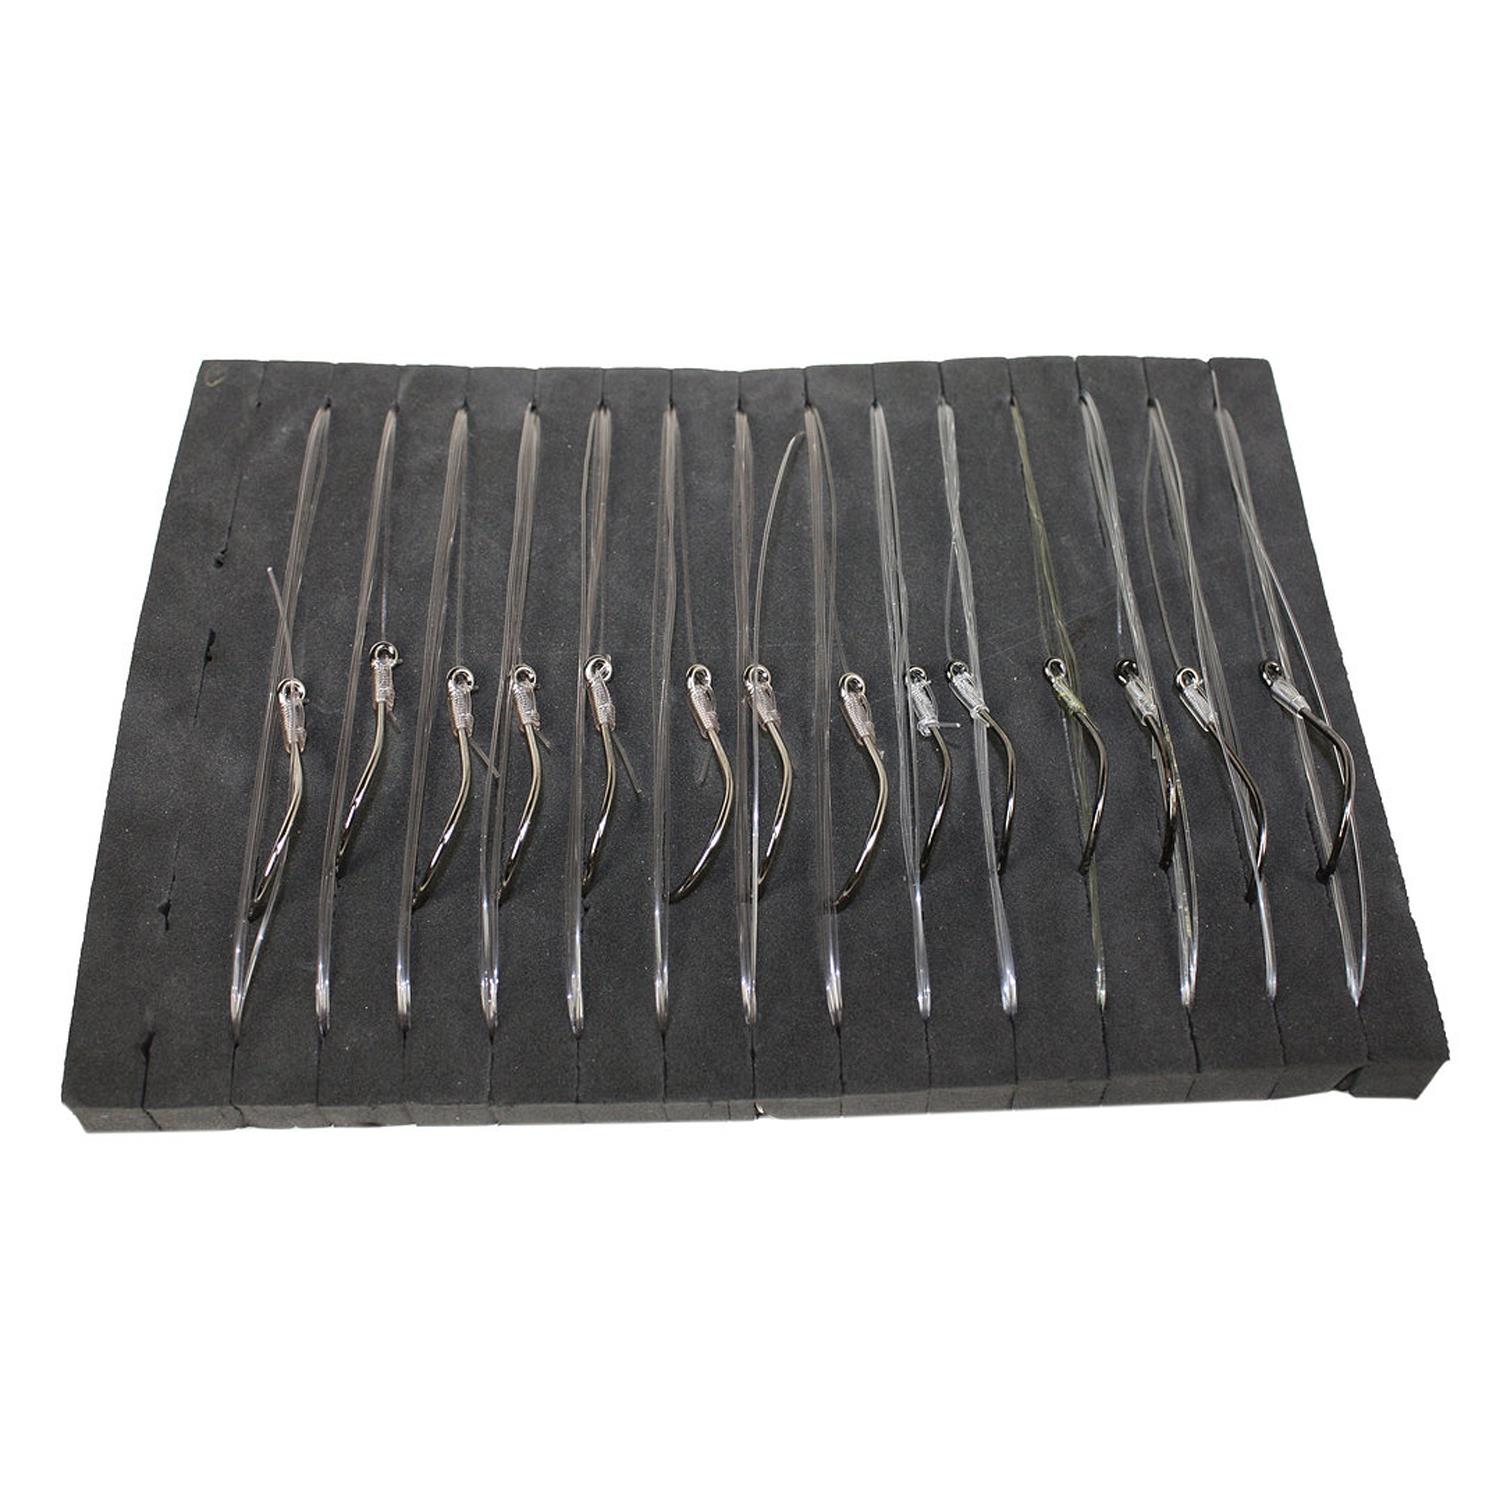 Fisheng Products Jig & Leader Board